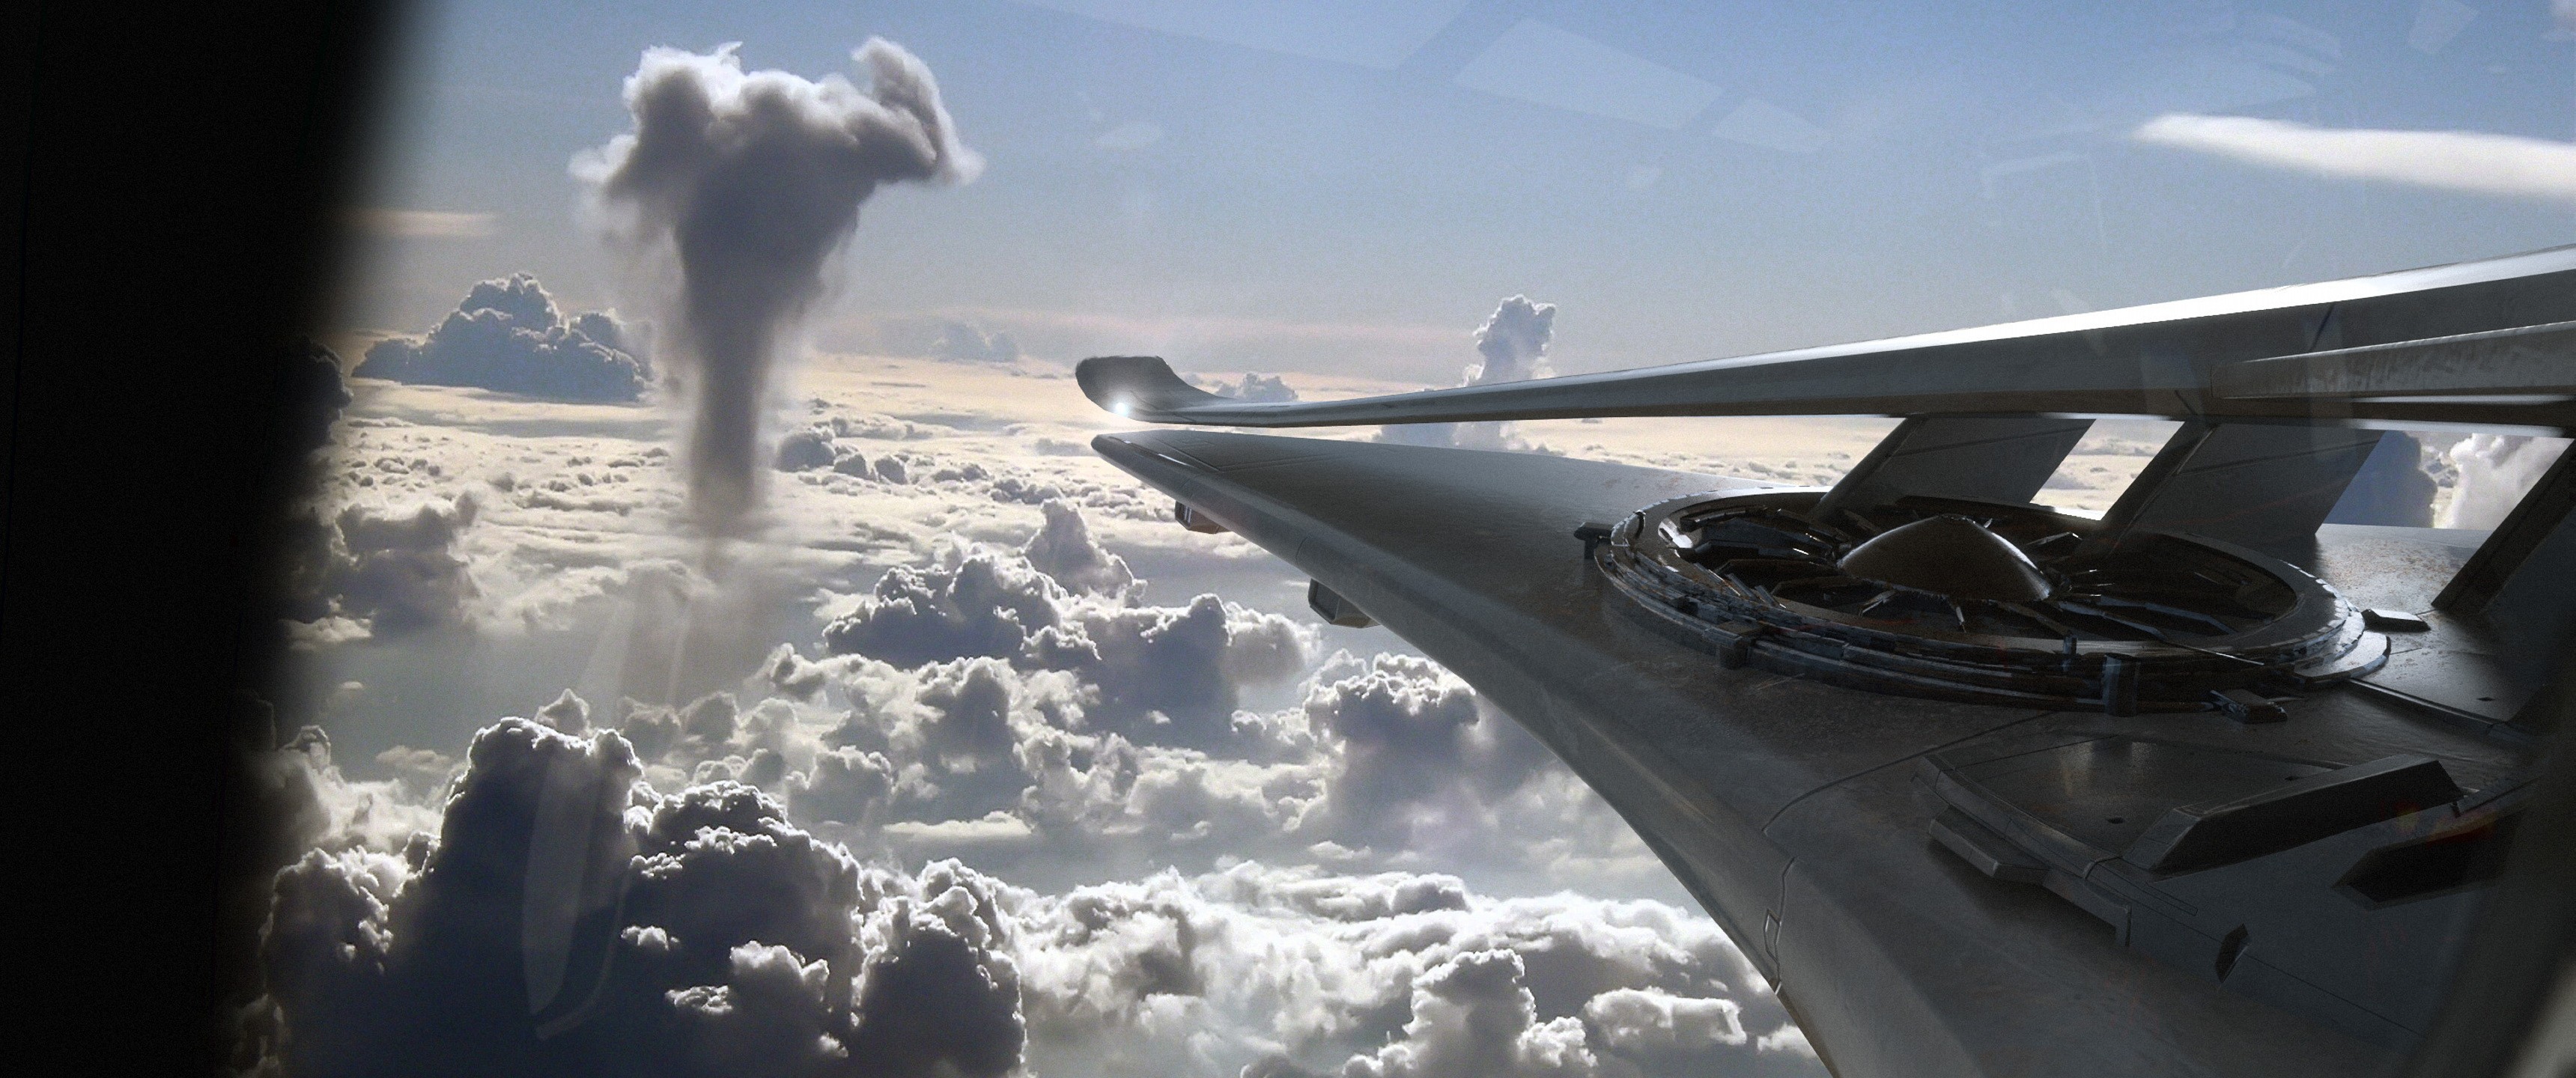 Download 3440x1440 Fantasy Art, Aircraft, Clouds, Skyscape